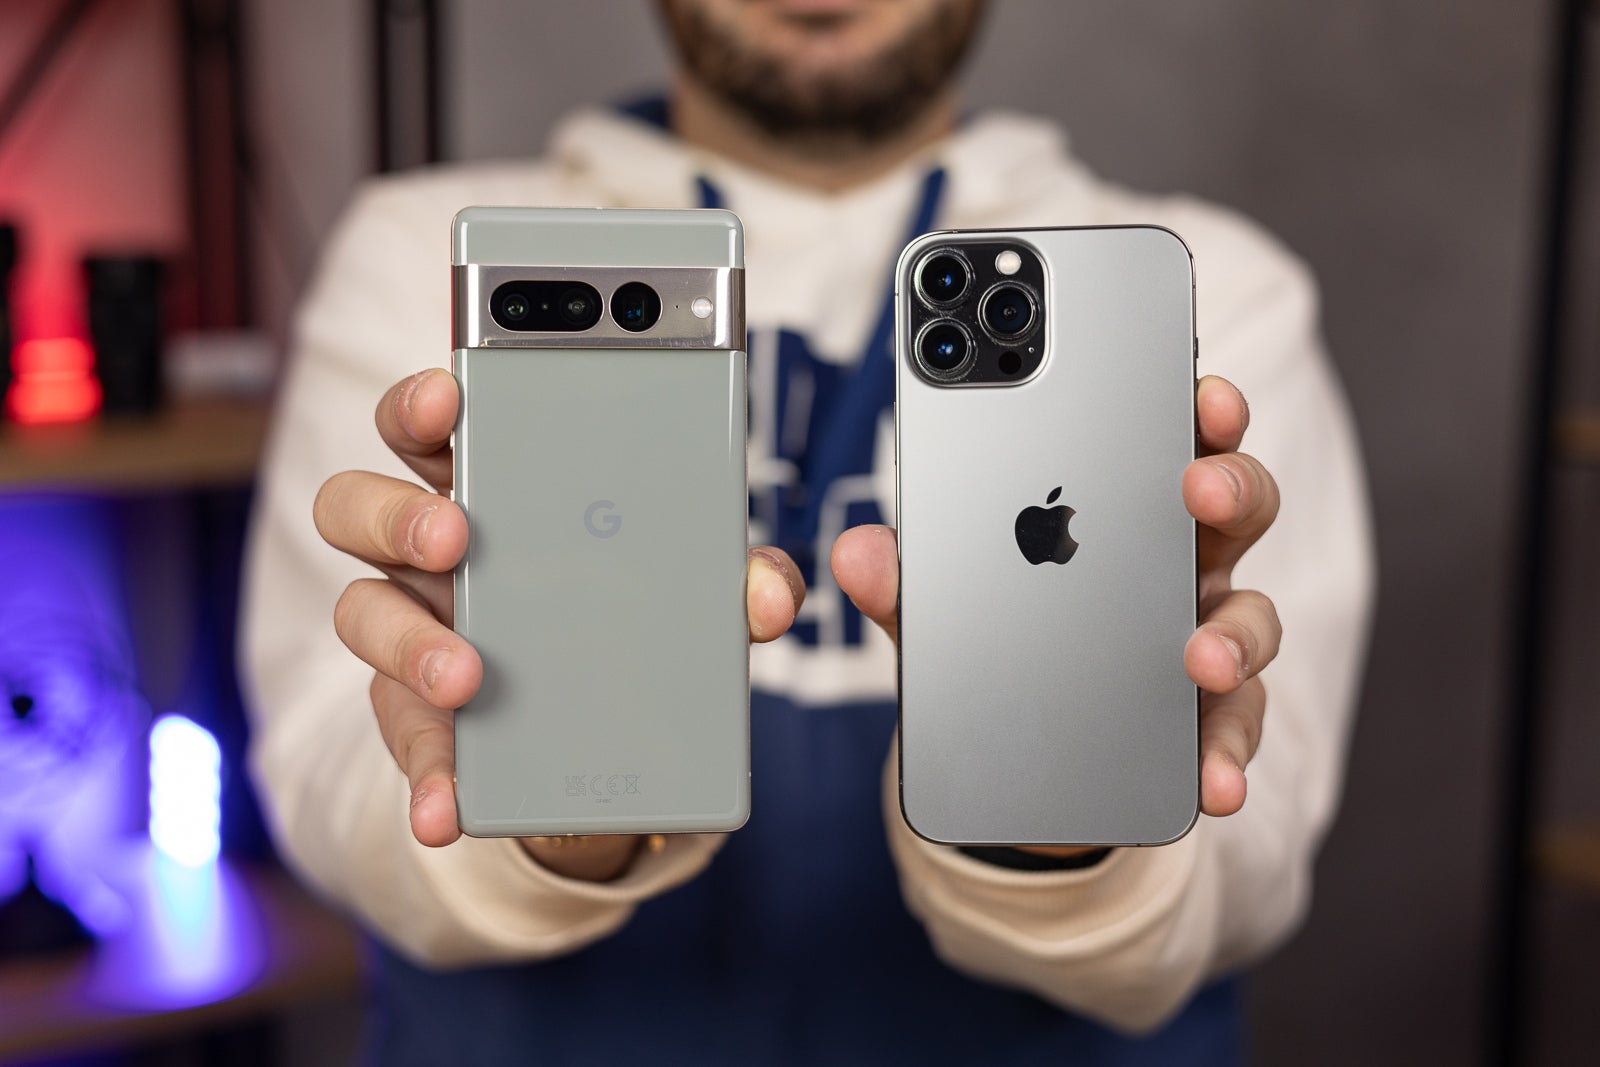 Pixel 7 Pro and iPhone 13 Pro Max